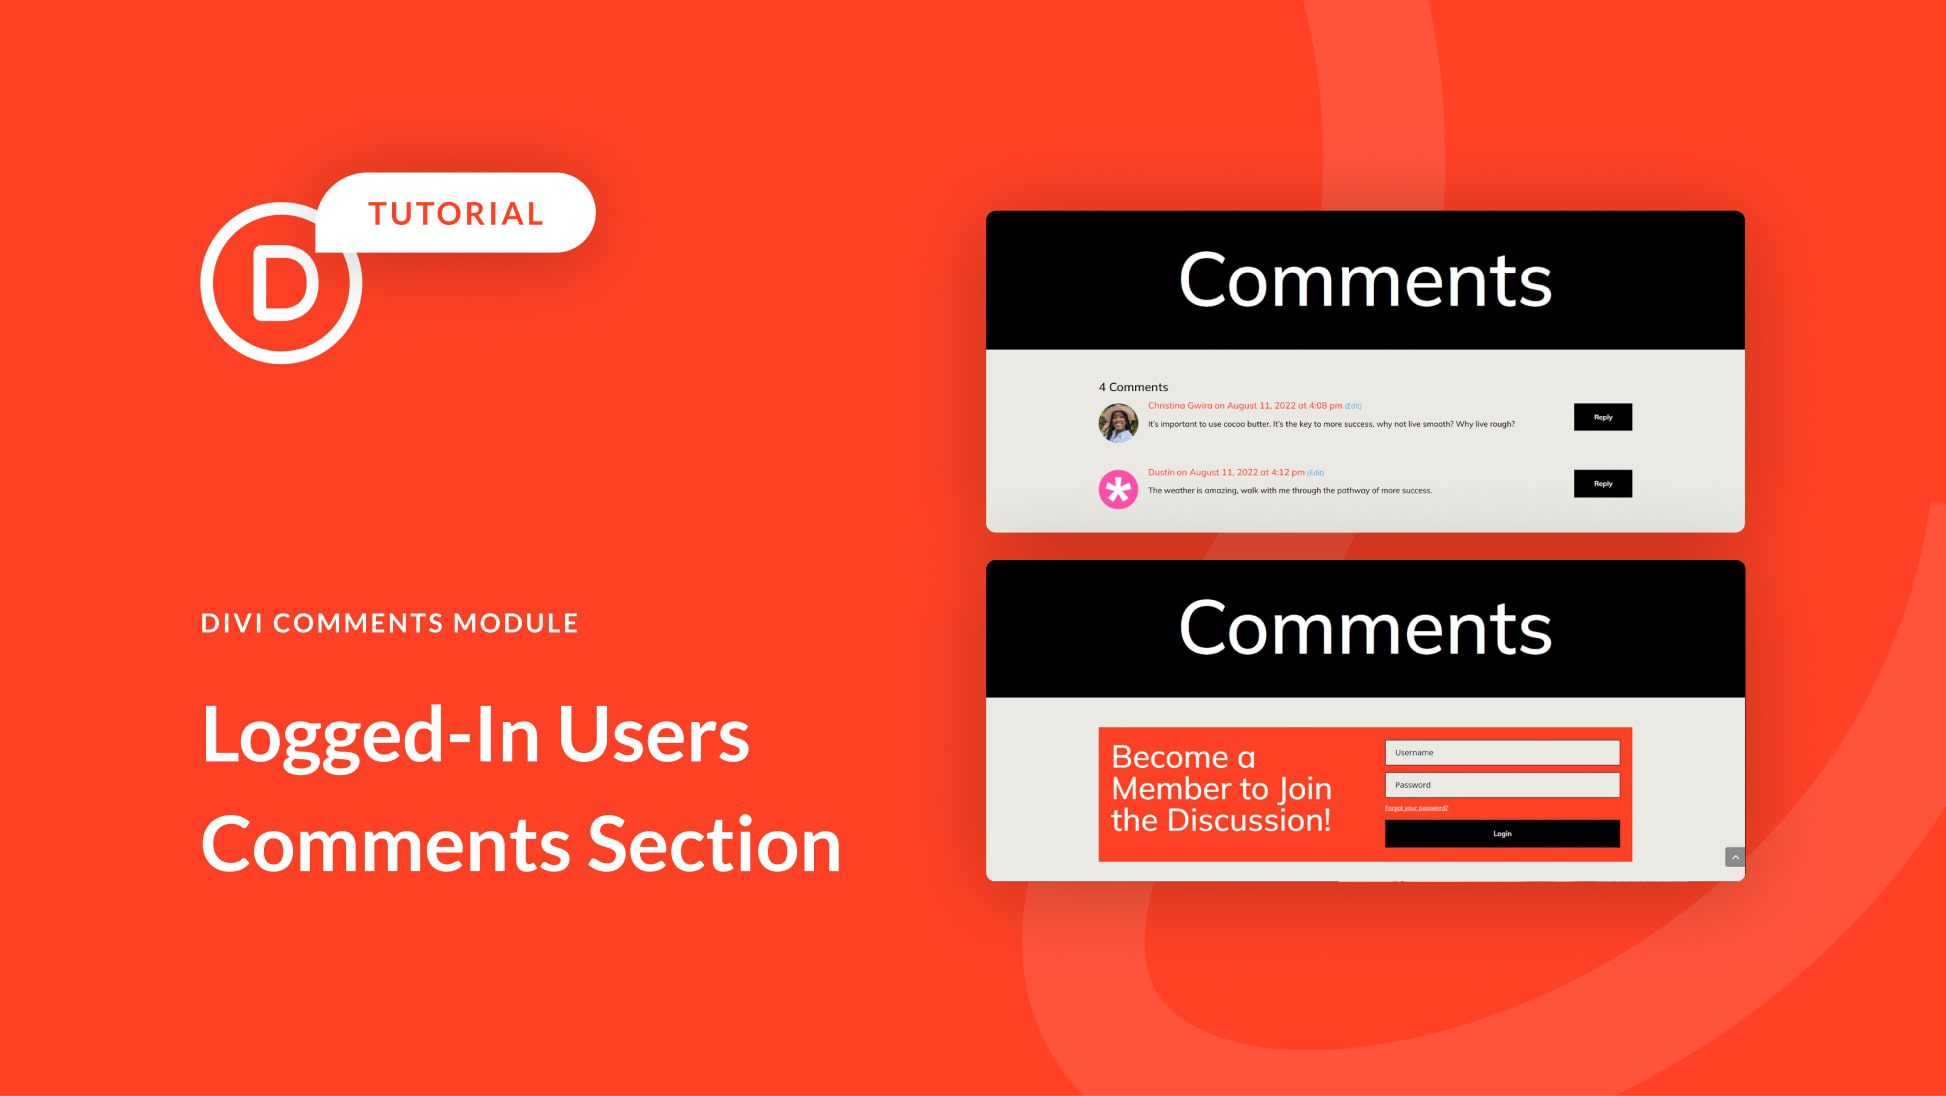 How to Show Divi’s Comments Module to Logged-In Users Only